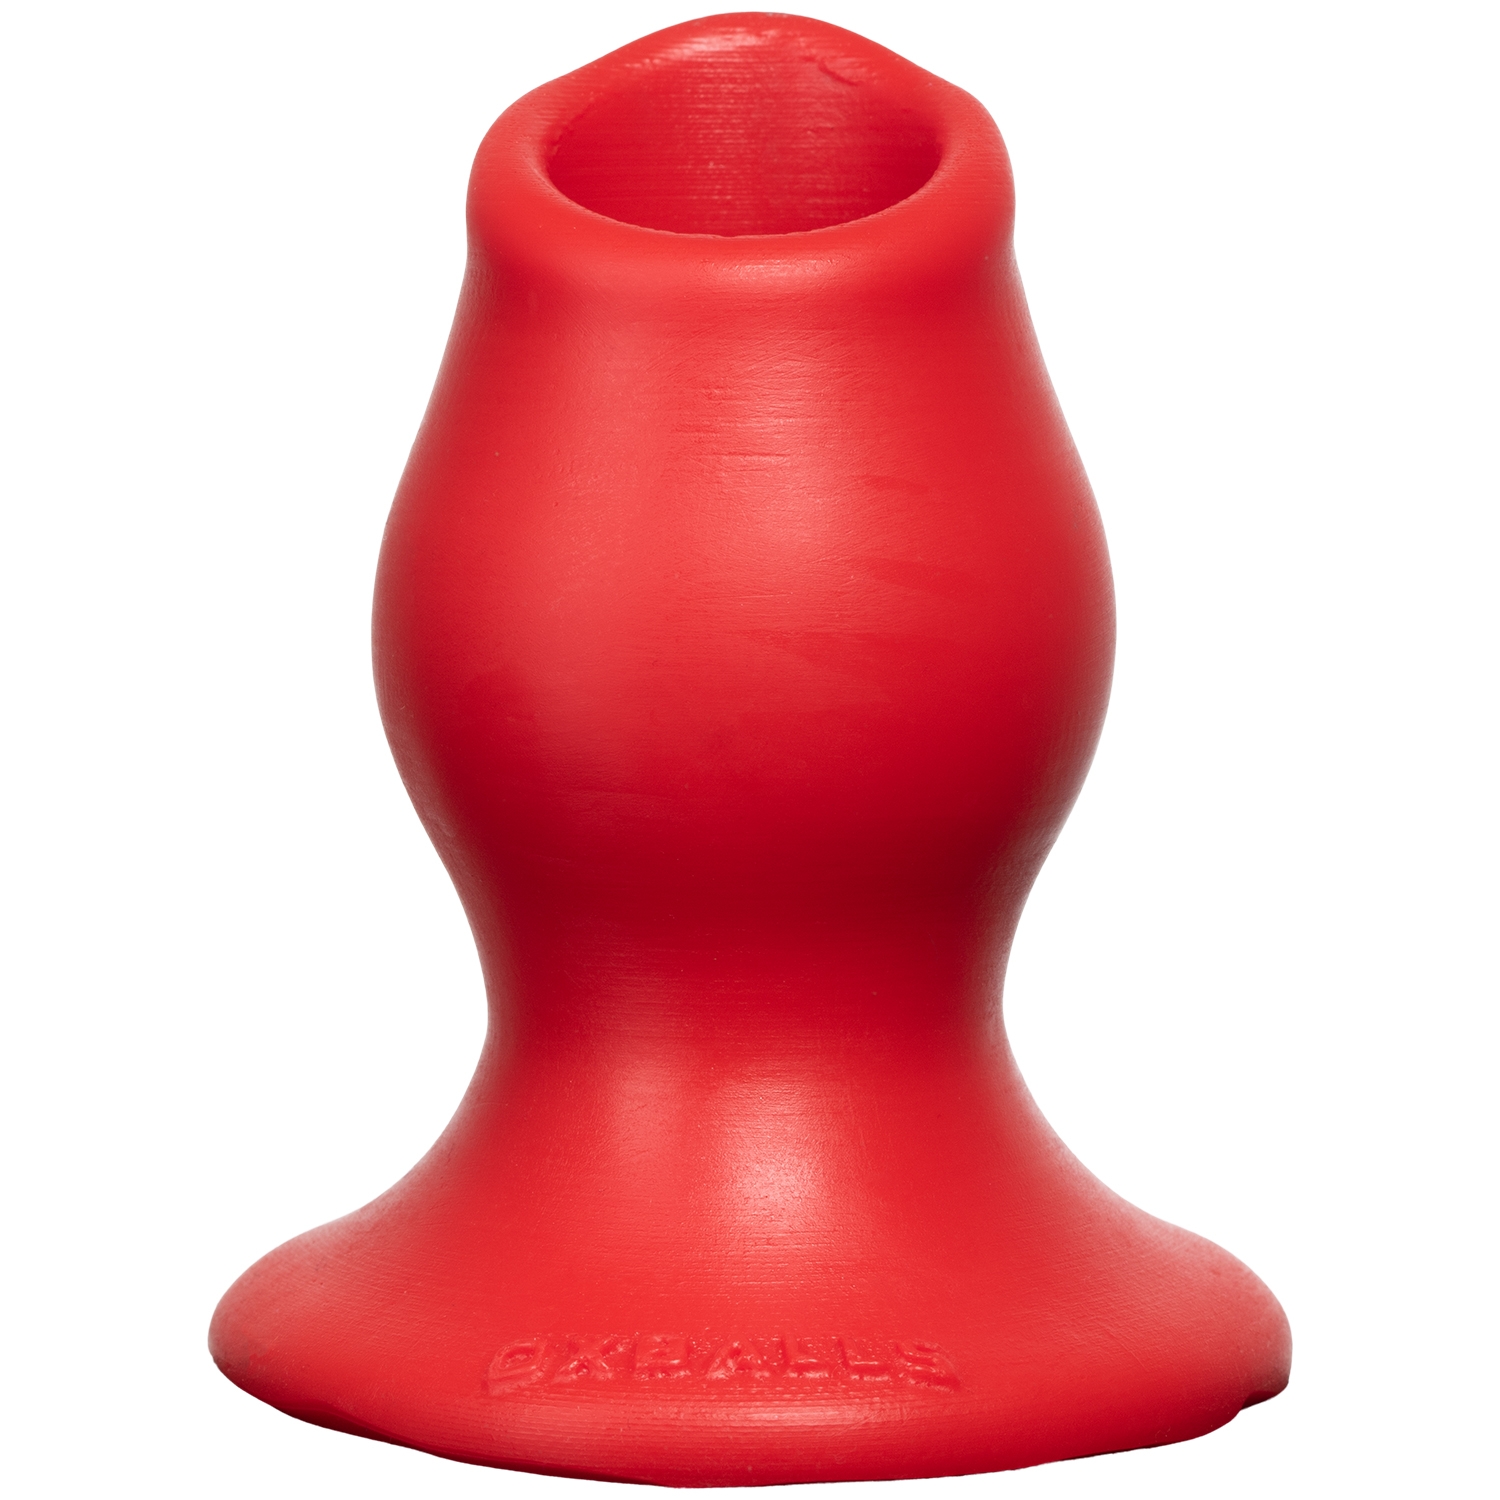 Oxballs Pig Hole Butt Plug Small - Red